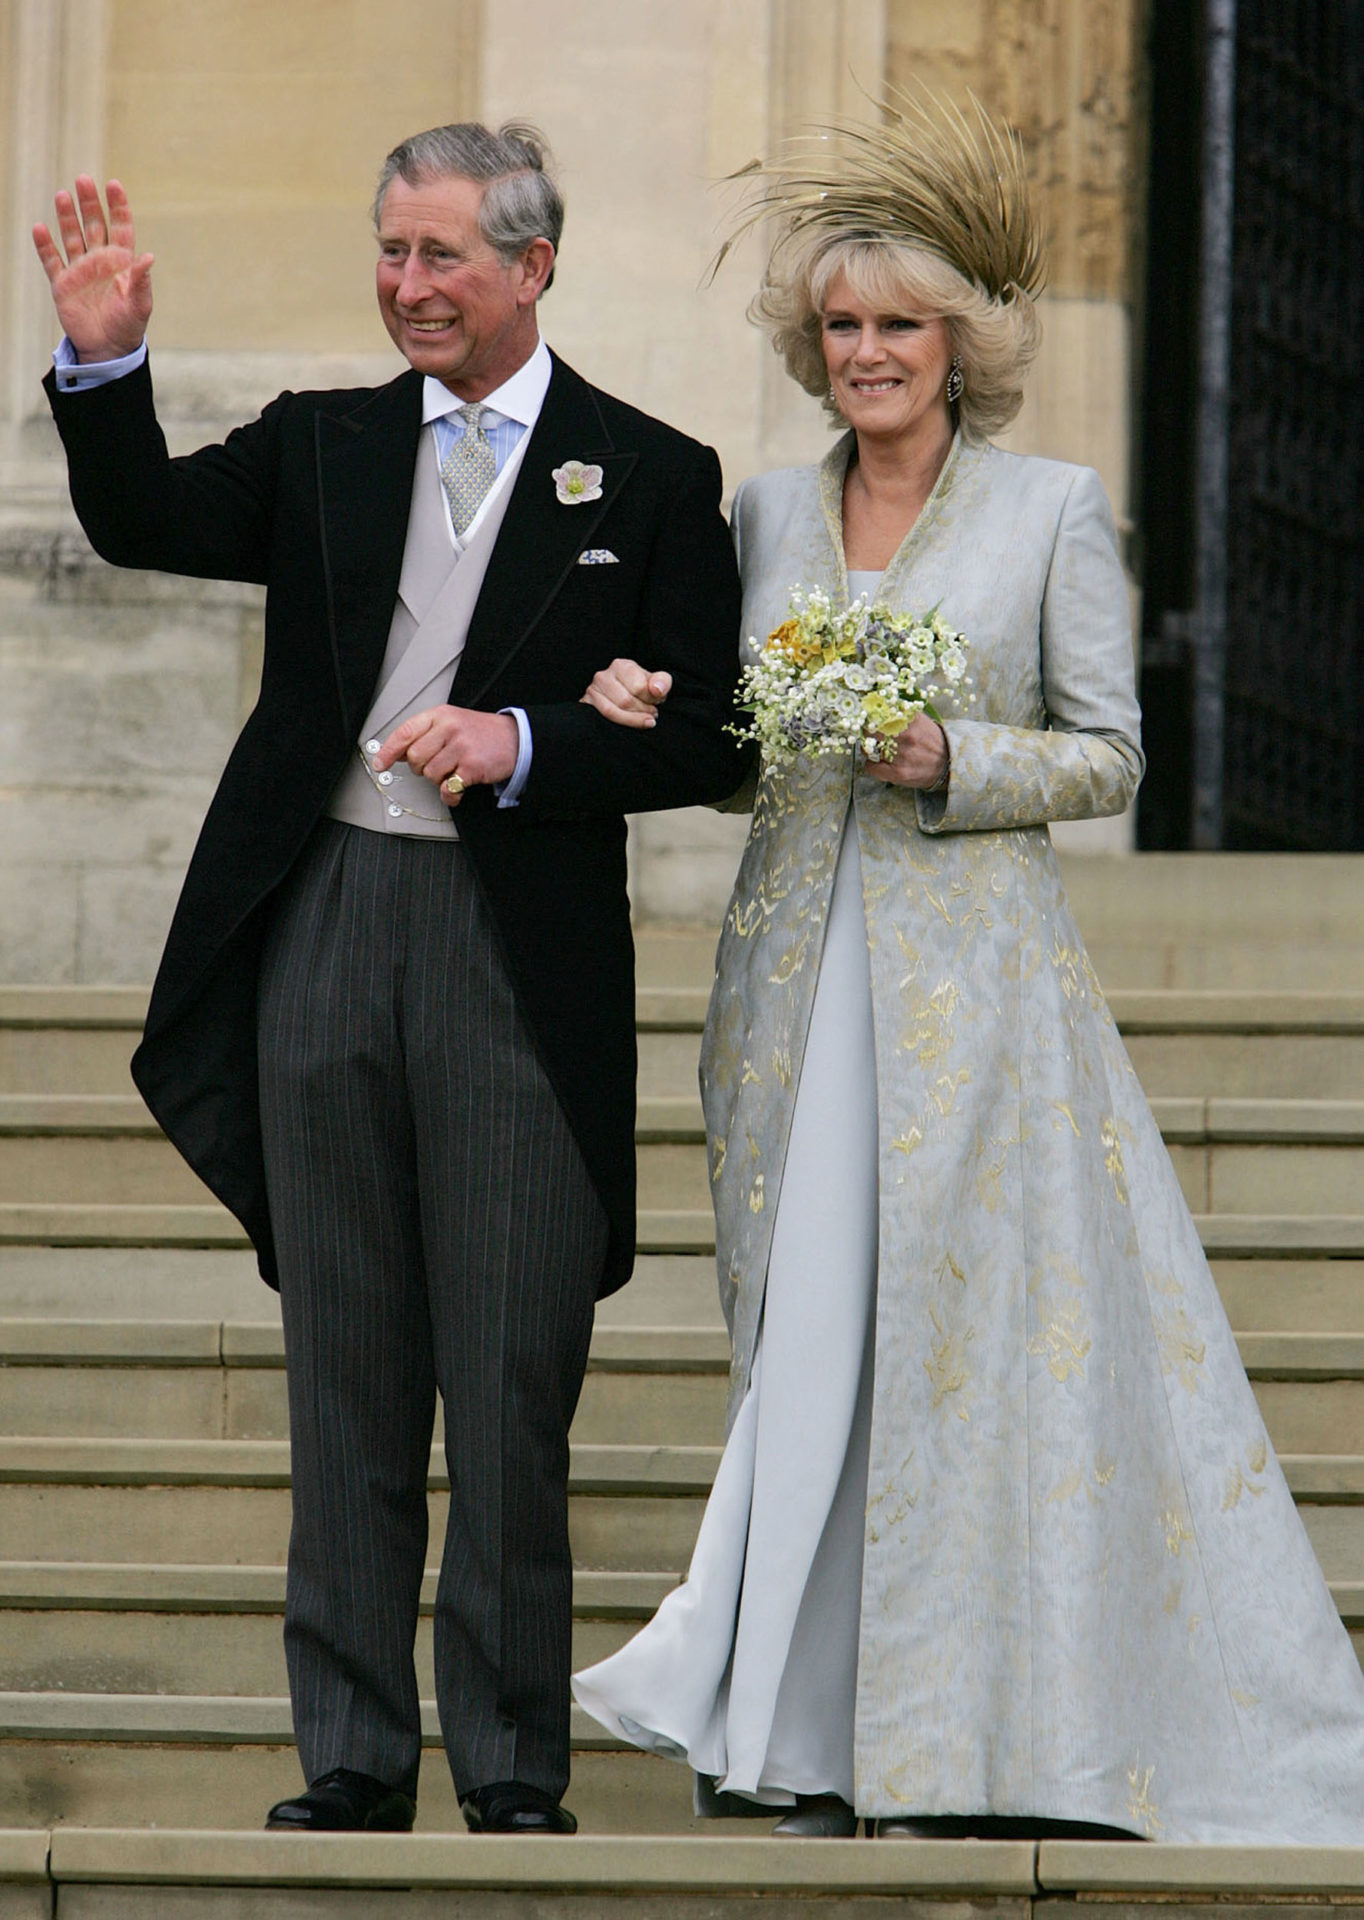 Prince Charles waves with the Duchess of